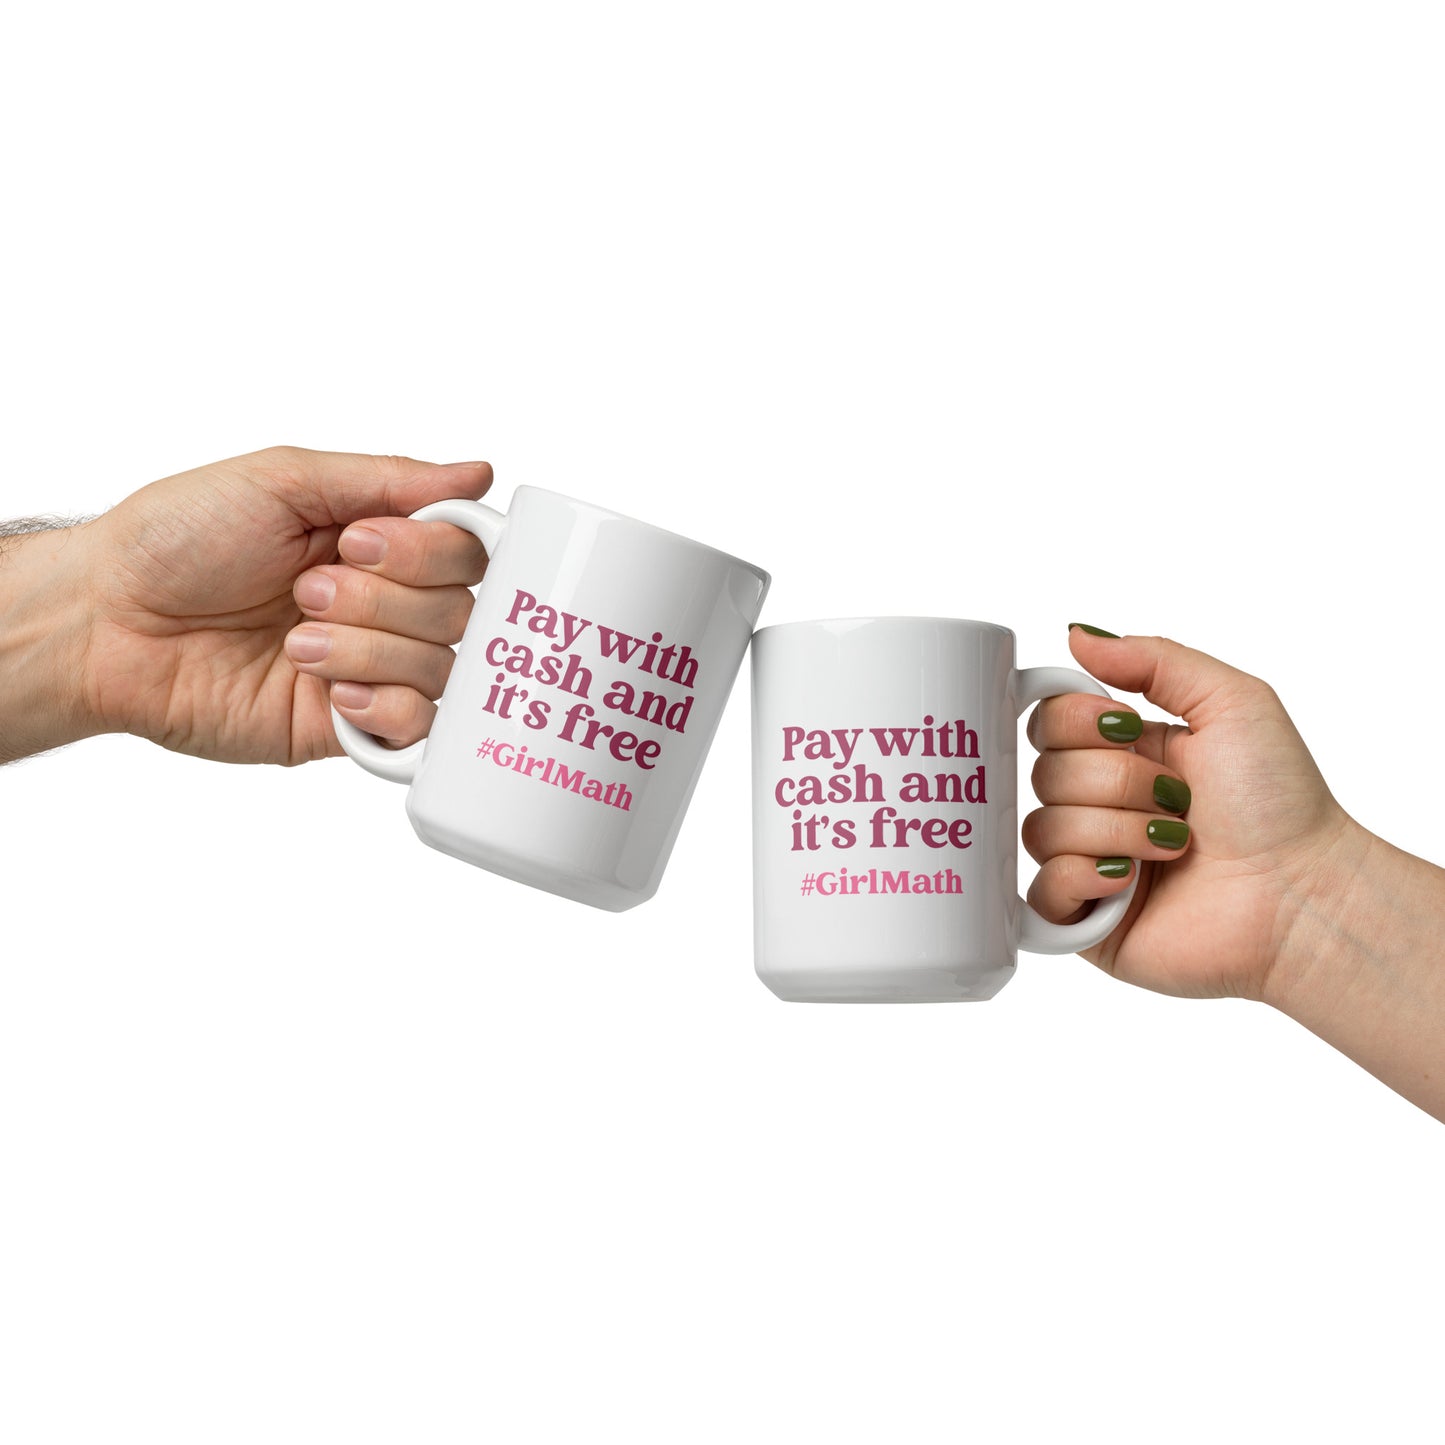 "Pay with cash and it's free #GirlMath" [Stay With Me] Mug